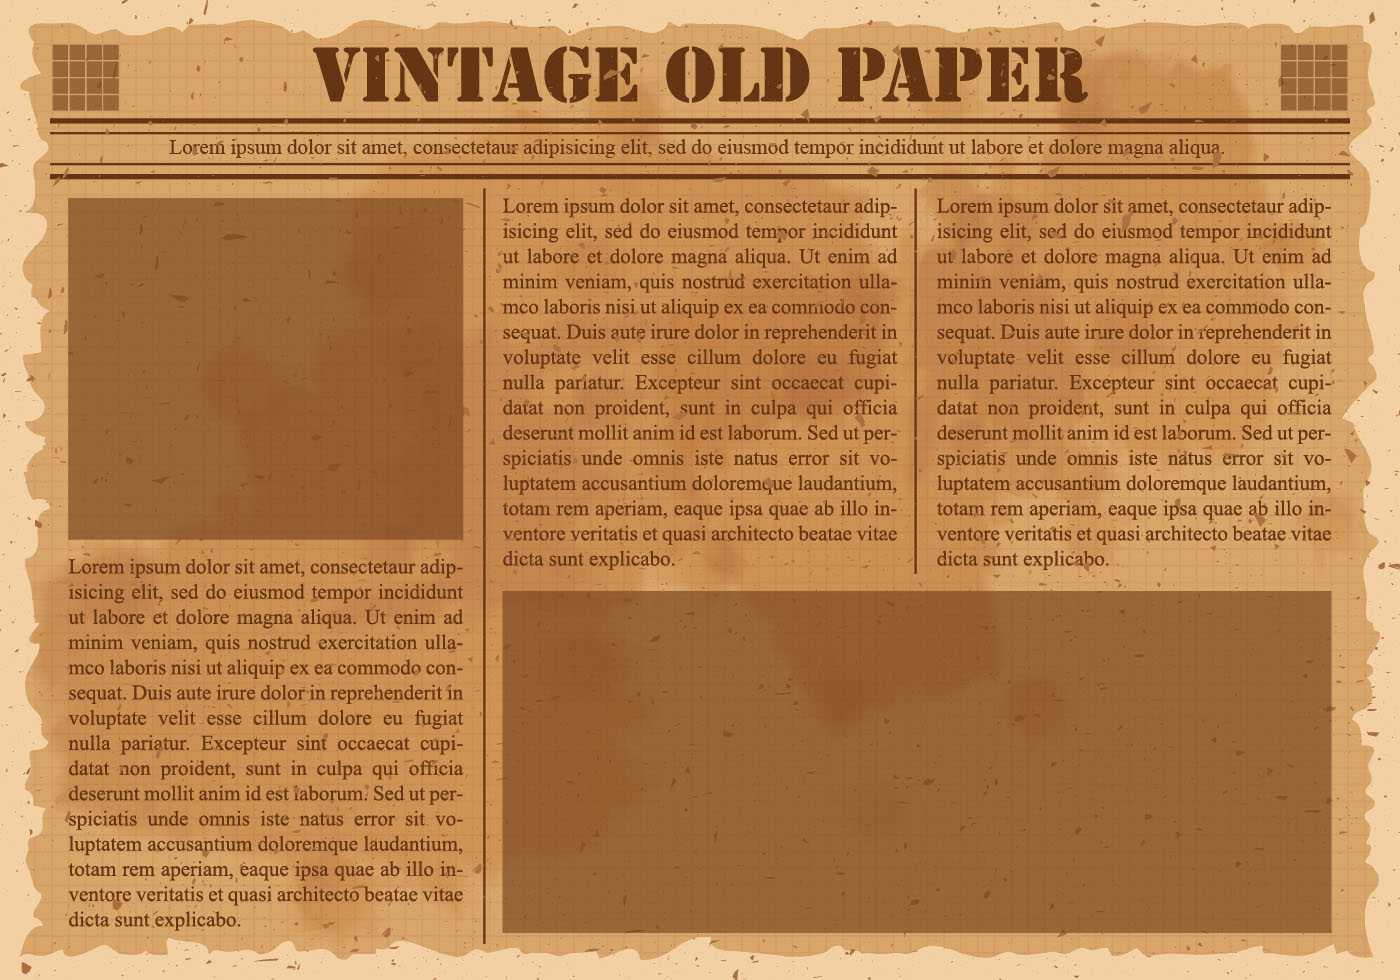 Old Vintage Newspaper - Download Free Vectors, Clipart With Old Blank Newspaper Template